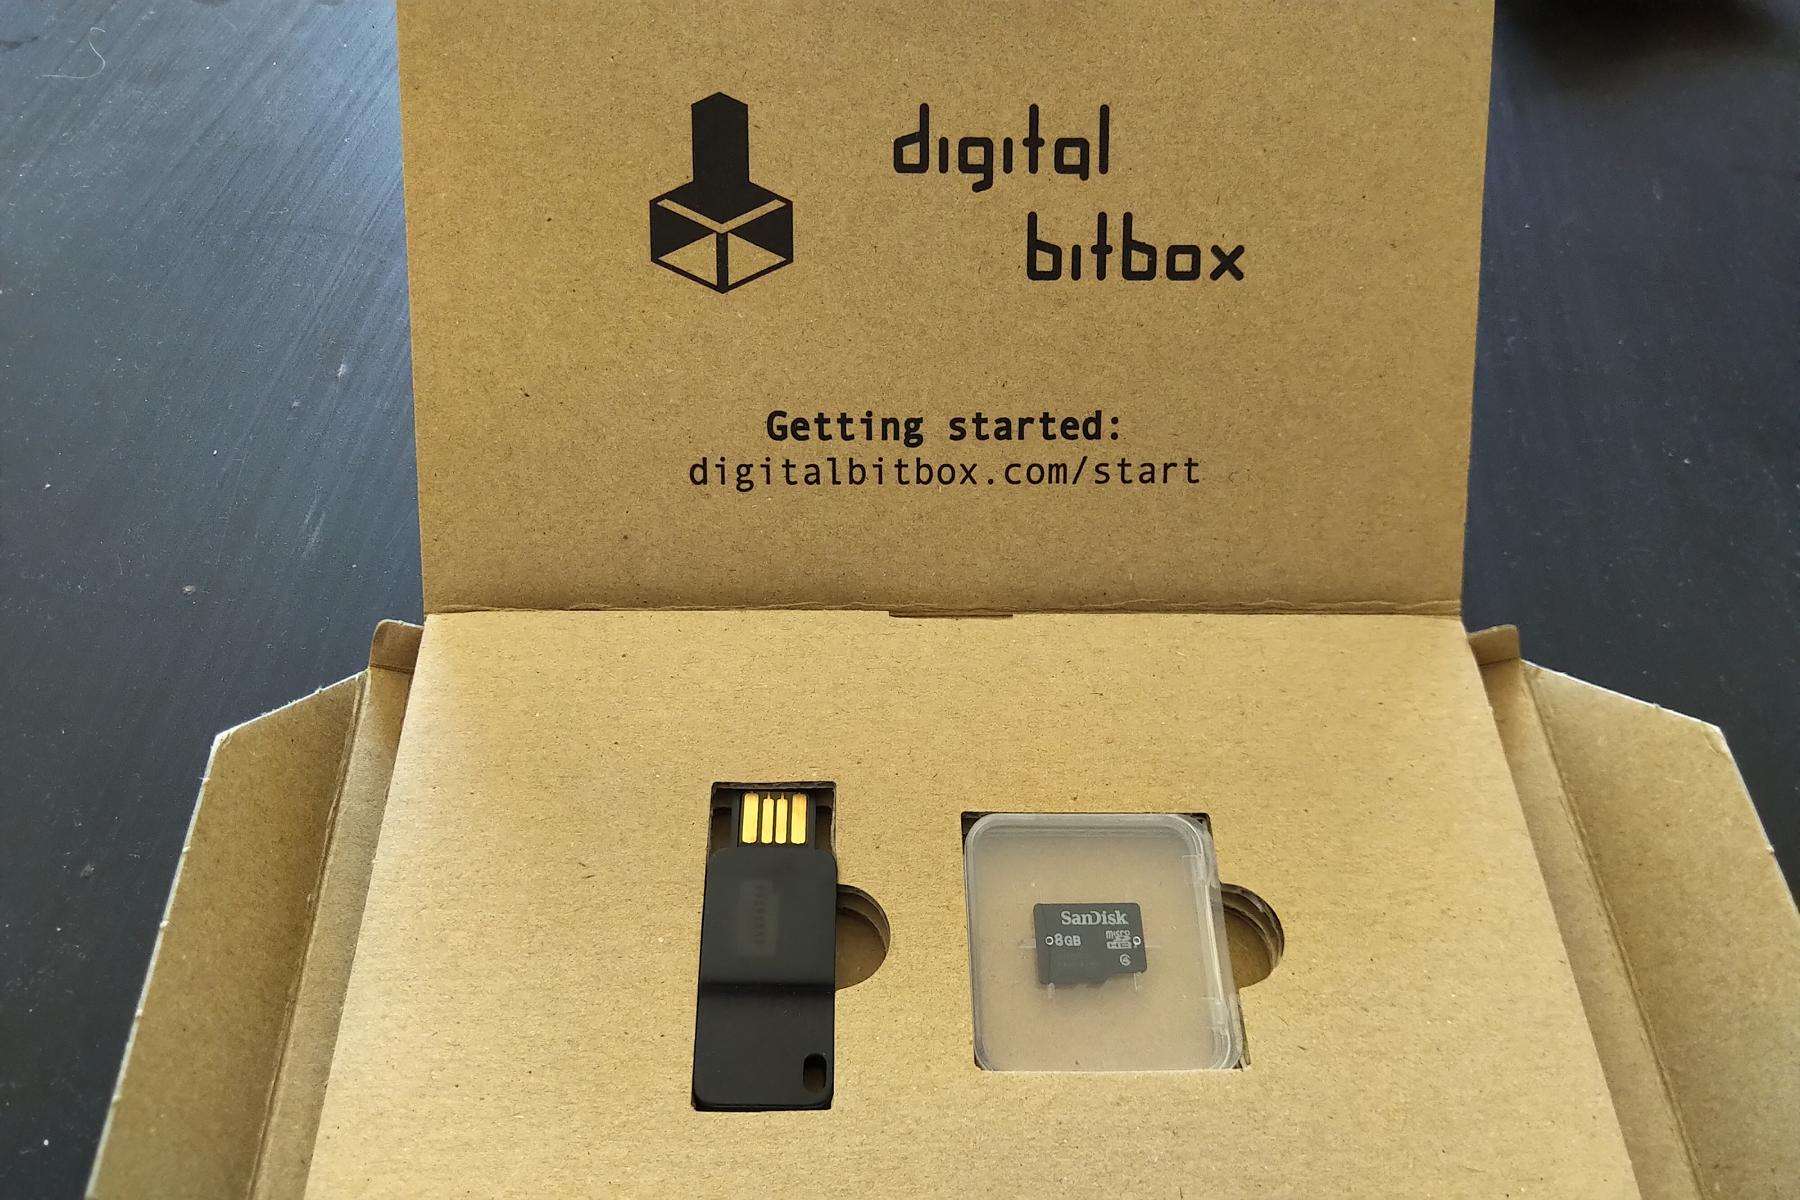 Digital BitBox Scope of Delivery